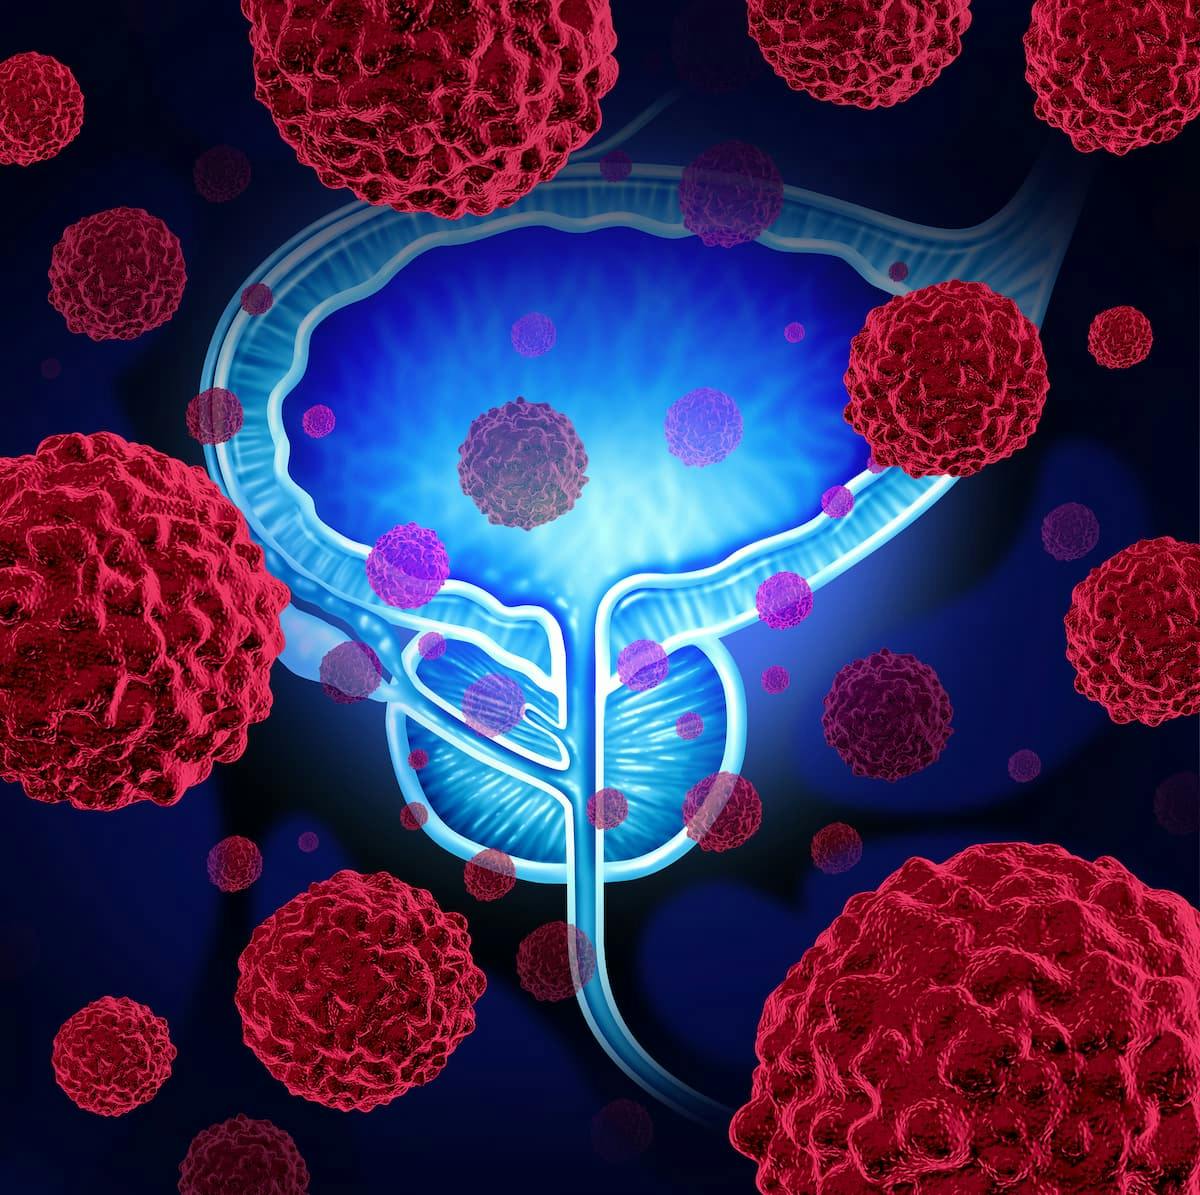 Patients with BRCA-positive metastatic castration-resistant prostate cancer may benefit from treatment with niraparib plus dual action abiraterone acetate tablets and prednisone, a new drug application for which was submitted to the FDA.